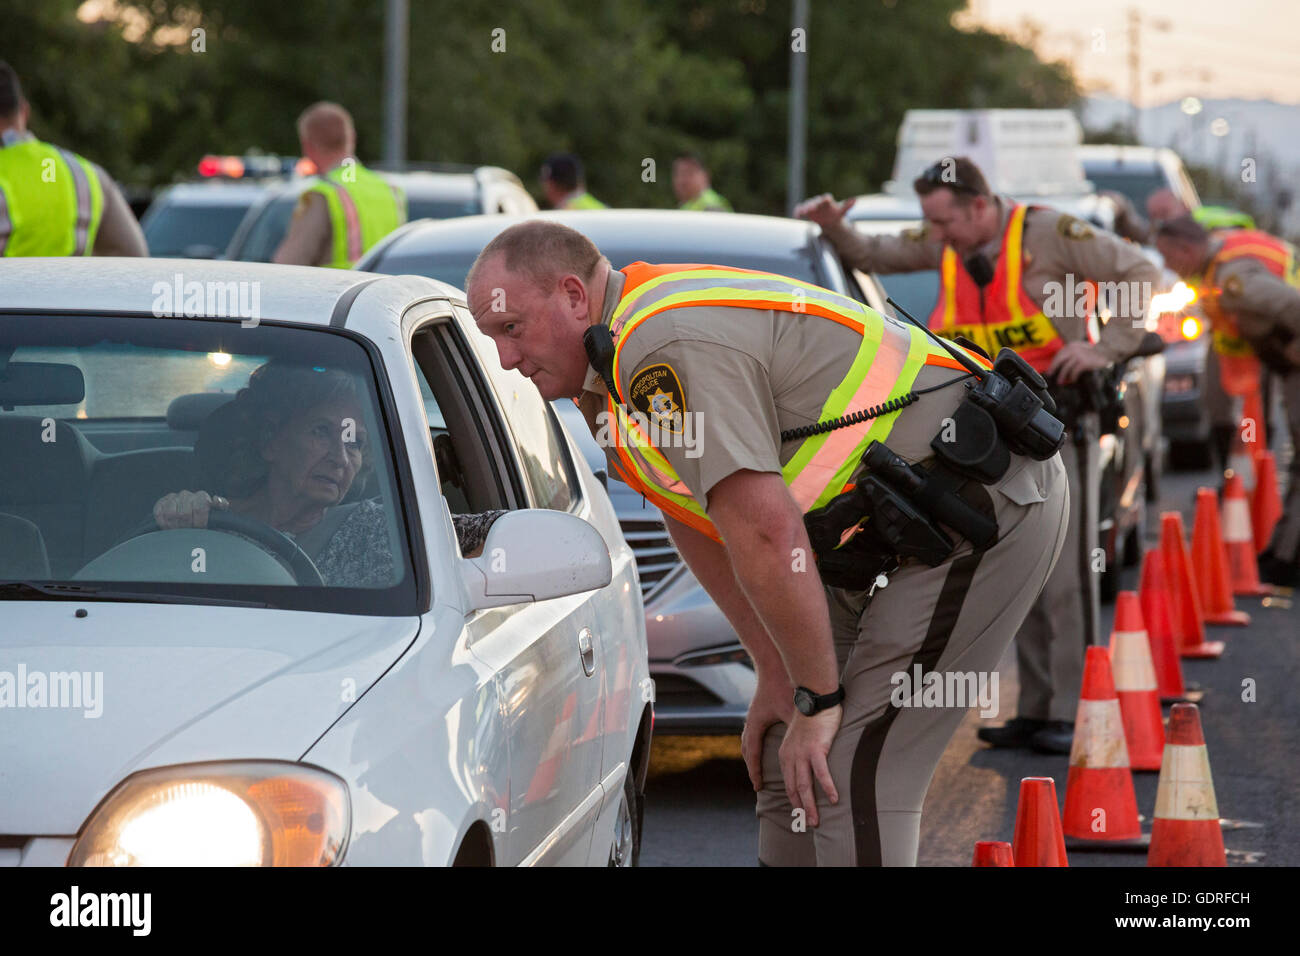 Las Vegas, Nevada - Police set up a sobriety checkpoint on Vegas Valley Drive, checking for alcohol or drug impairment. Stock Photo